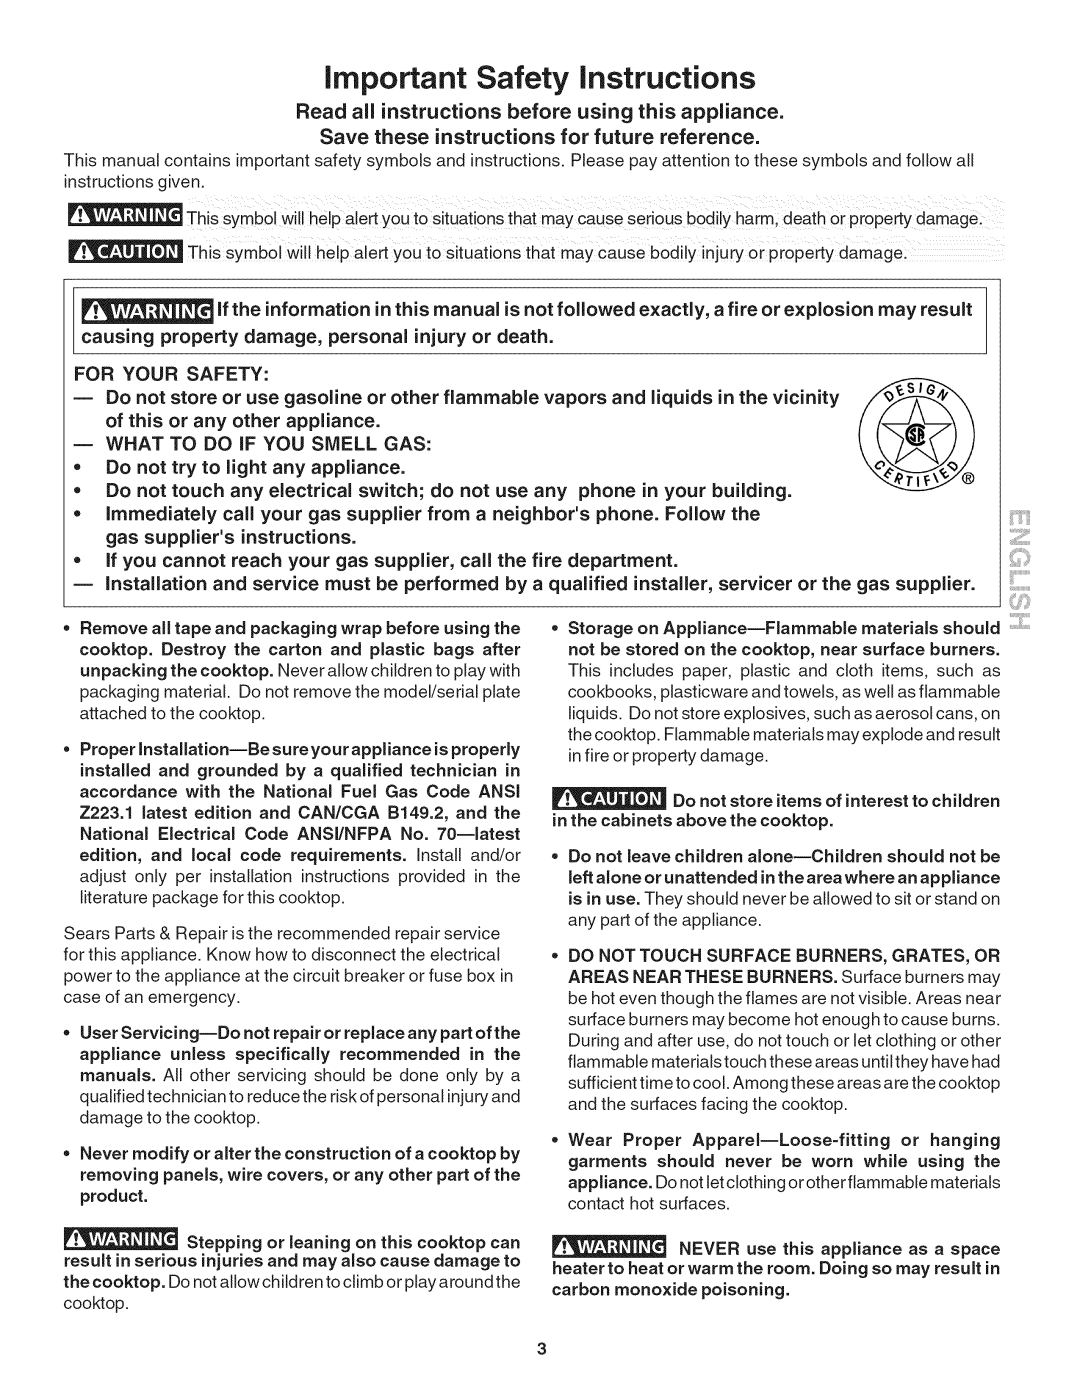 Kenmore 790.3249 manual important Safety instructions, Read all instructions before using this appliance, For Your Safety 